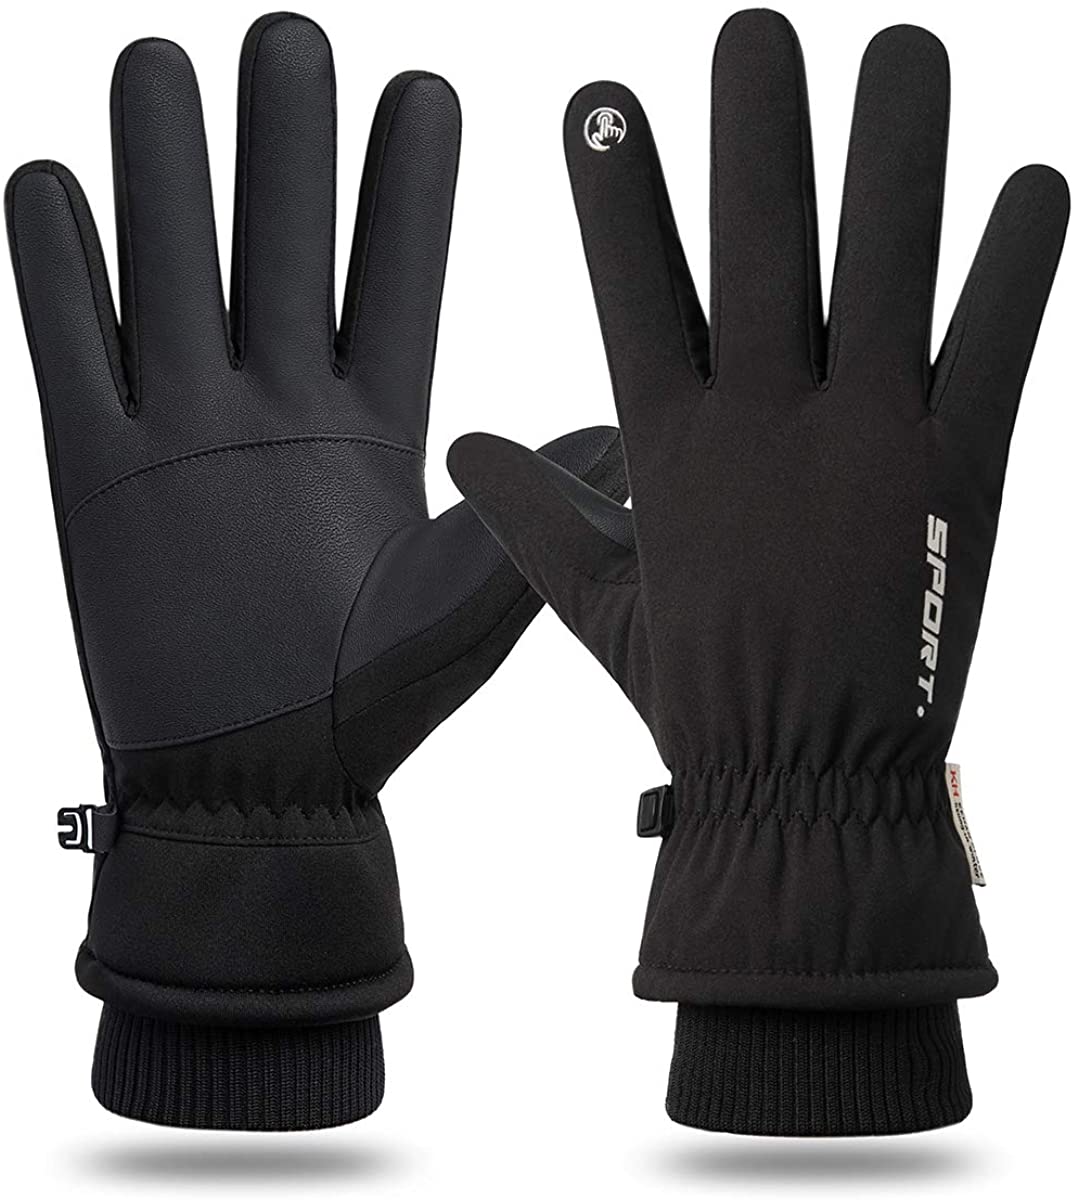 Waterproof Anti-Slip Touch-Screen Thermal Cycling Gloves 